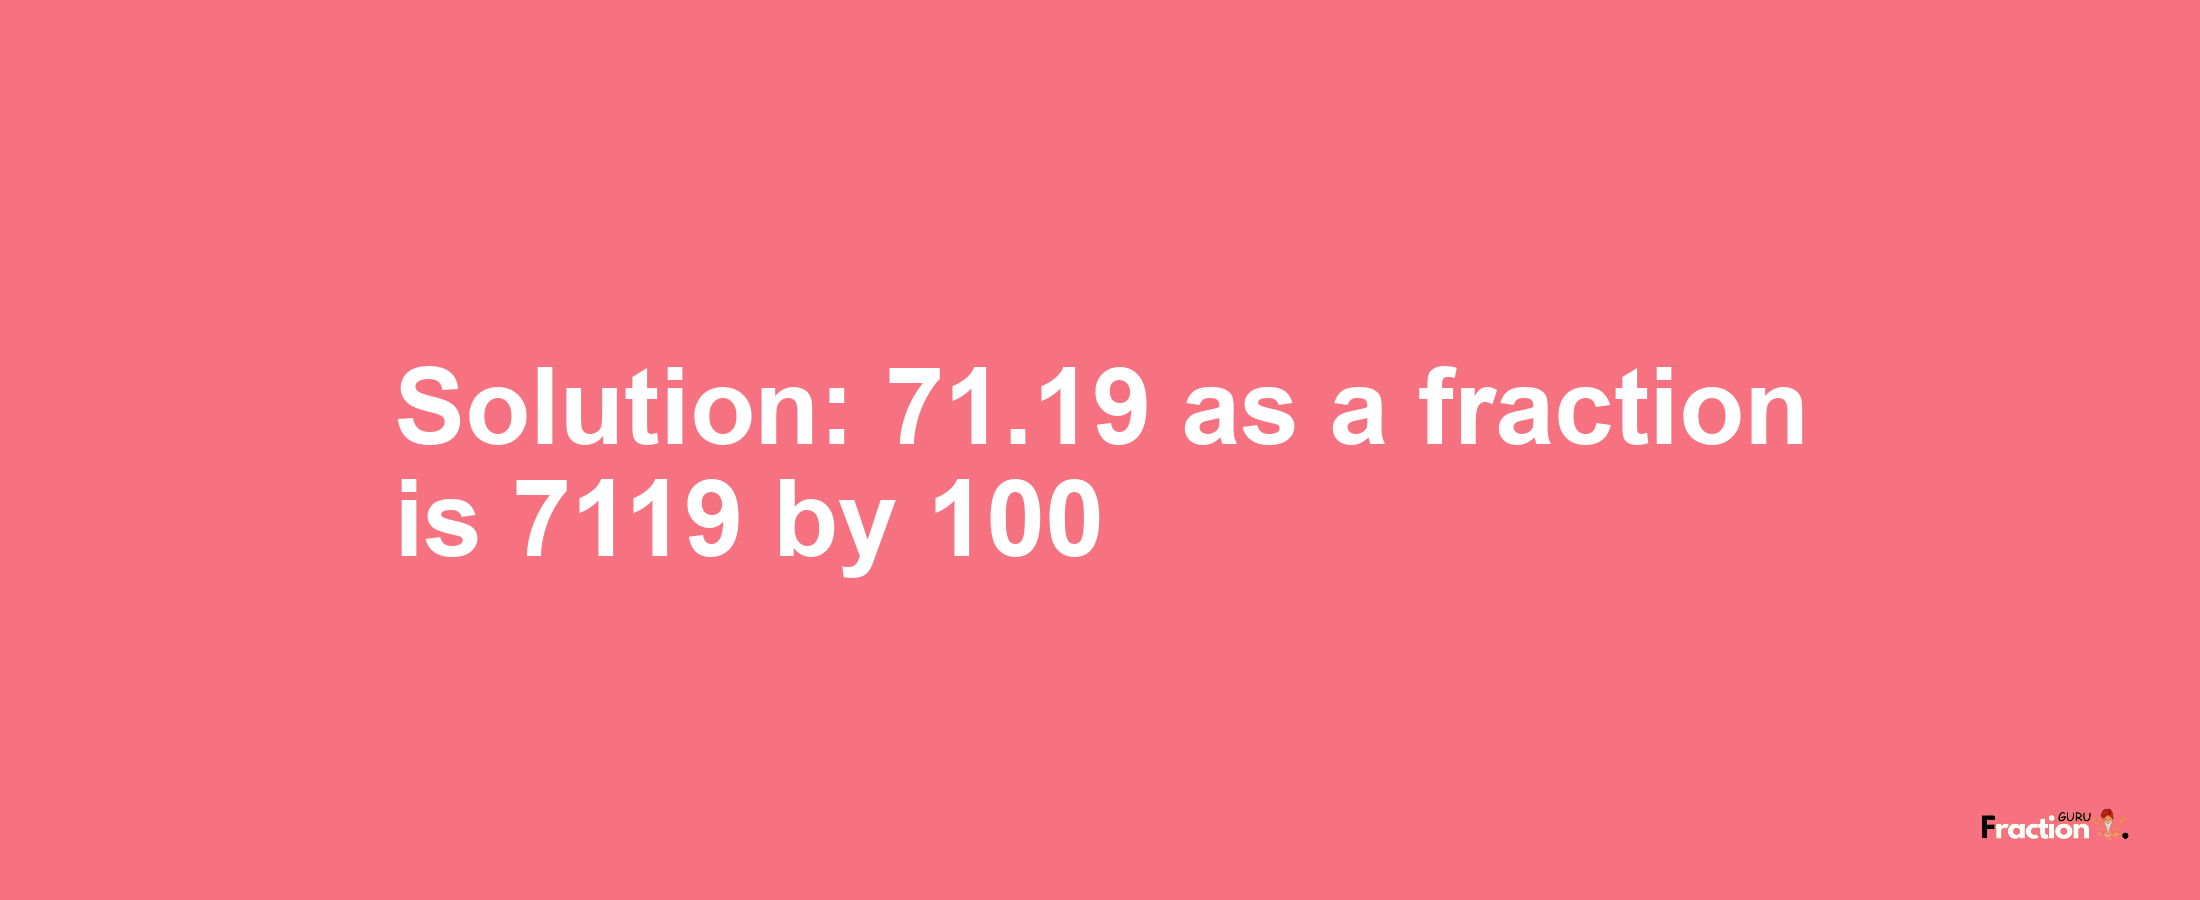 Solution:71.19 as a fraction is 7119/100